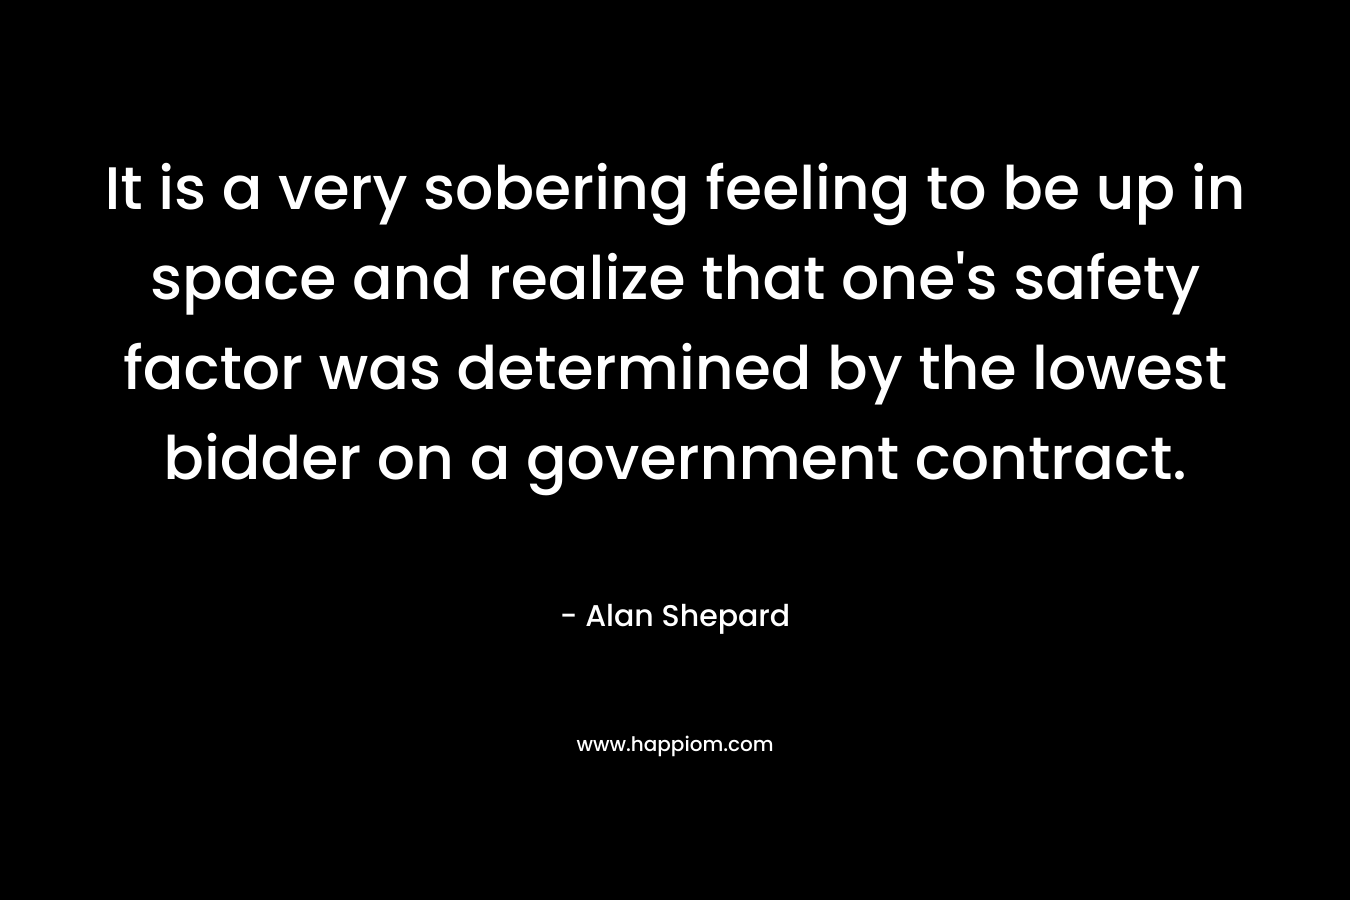 It is a very sobering feeling to be up in space and realize that one’s safety factor was determined by the lowest bidder on a government contract. – Alan Shepard